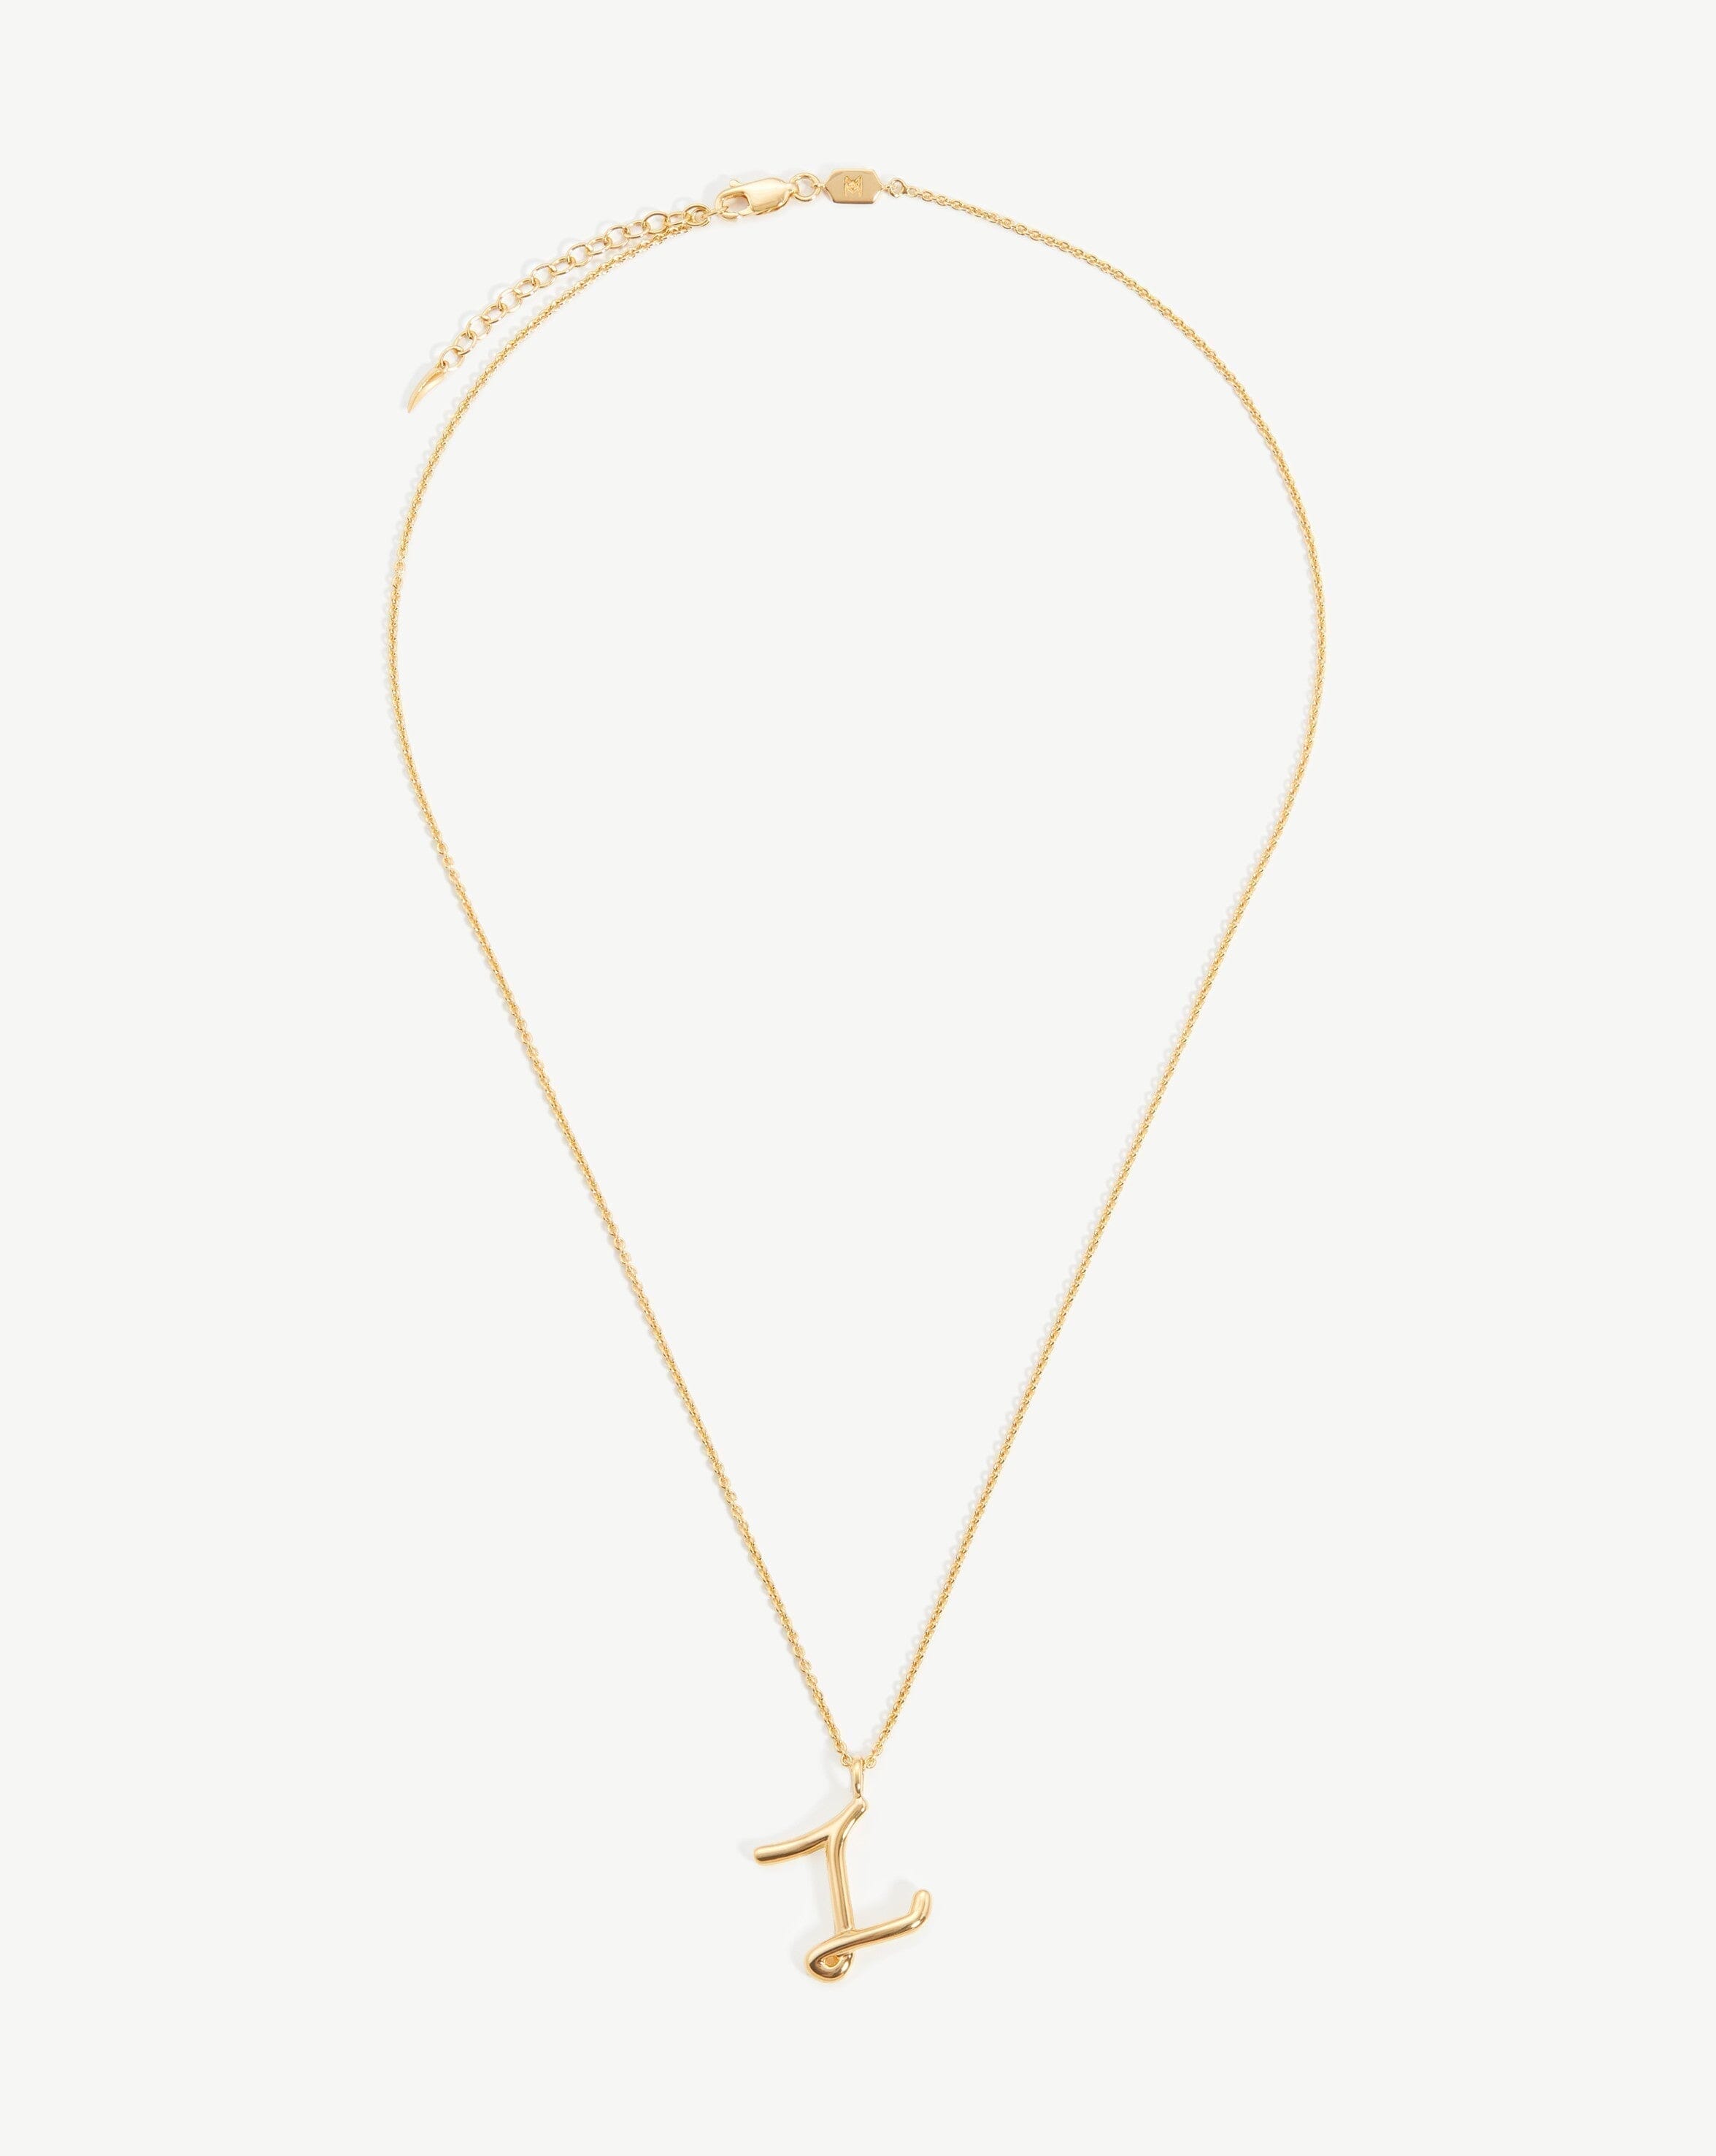 Curly Molten Initial Pendant Necklace - Initial Z | 18ct Gold Plated Vermeil Necklaces Missoma 